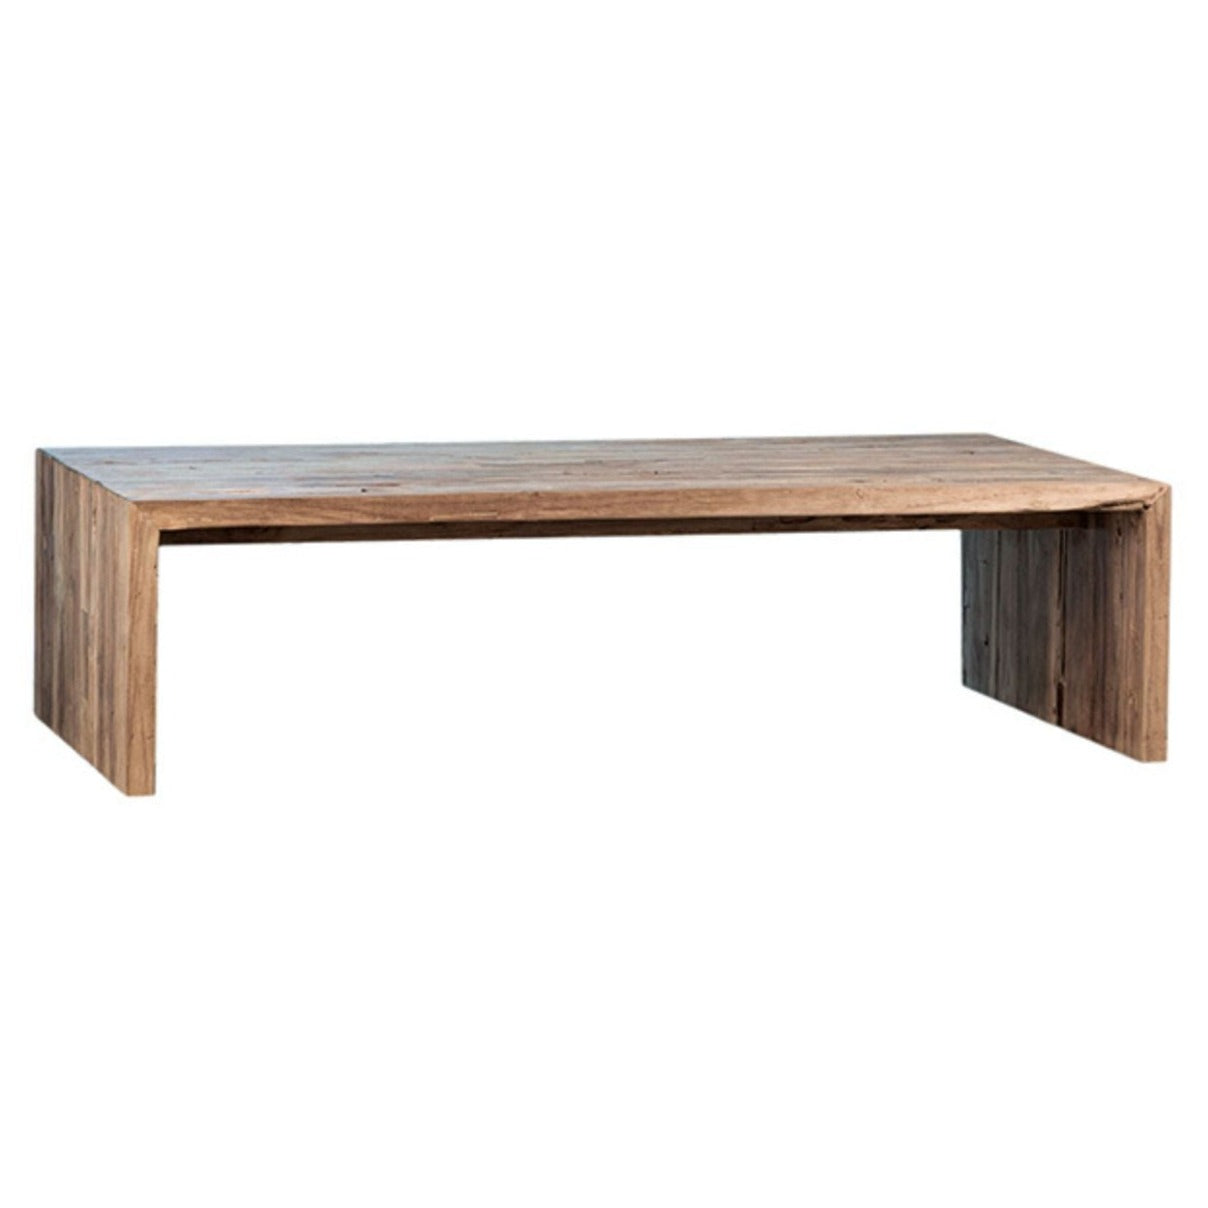 Coffee Table made from Reclaimed Teak Wood. Medium Brown Natural Wood Sealed Finish.